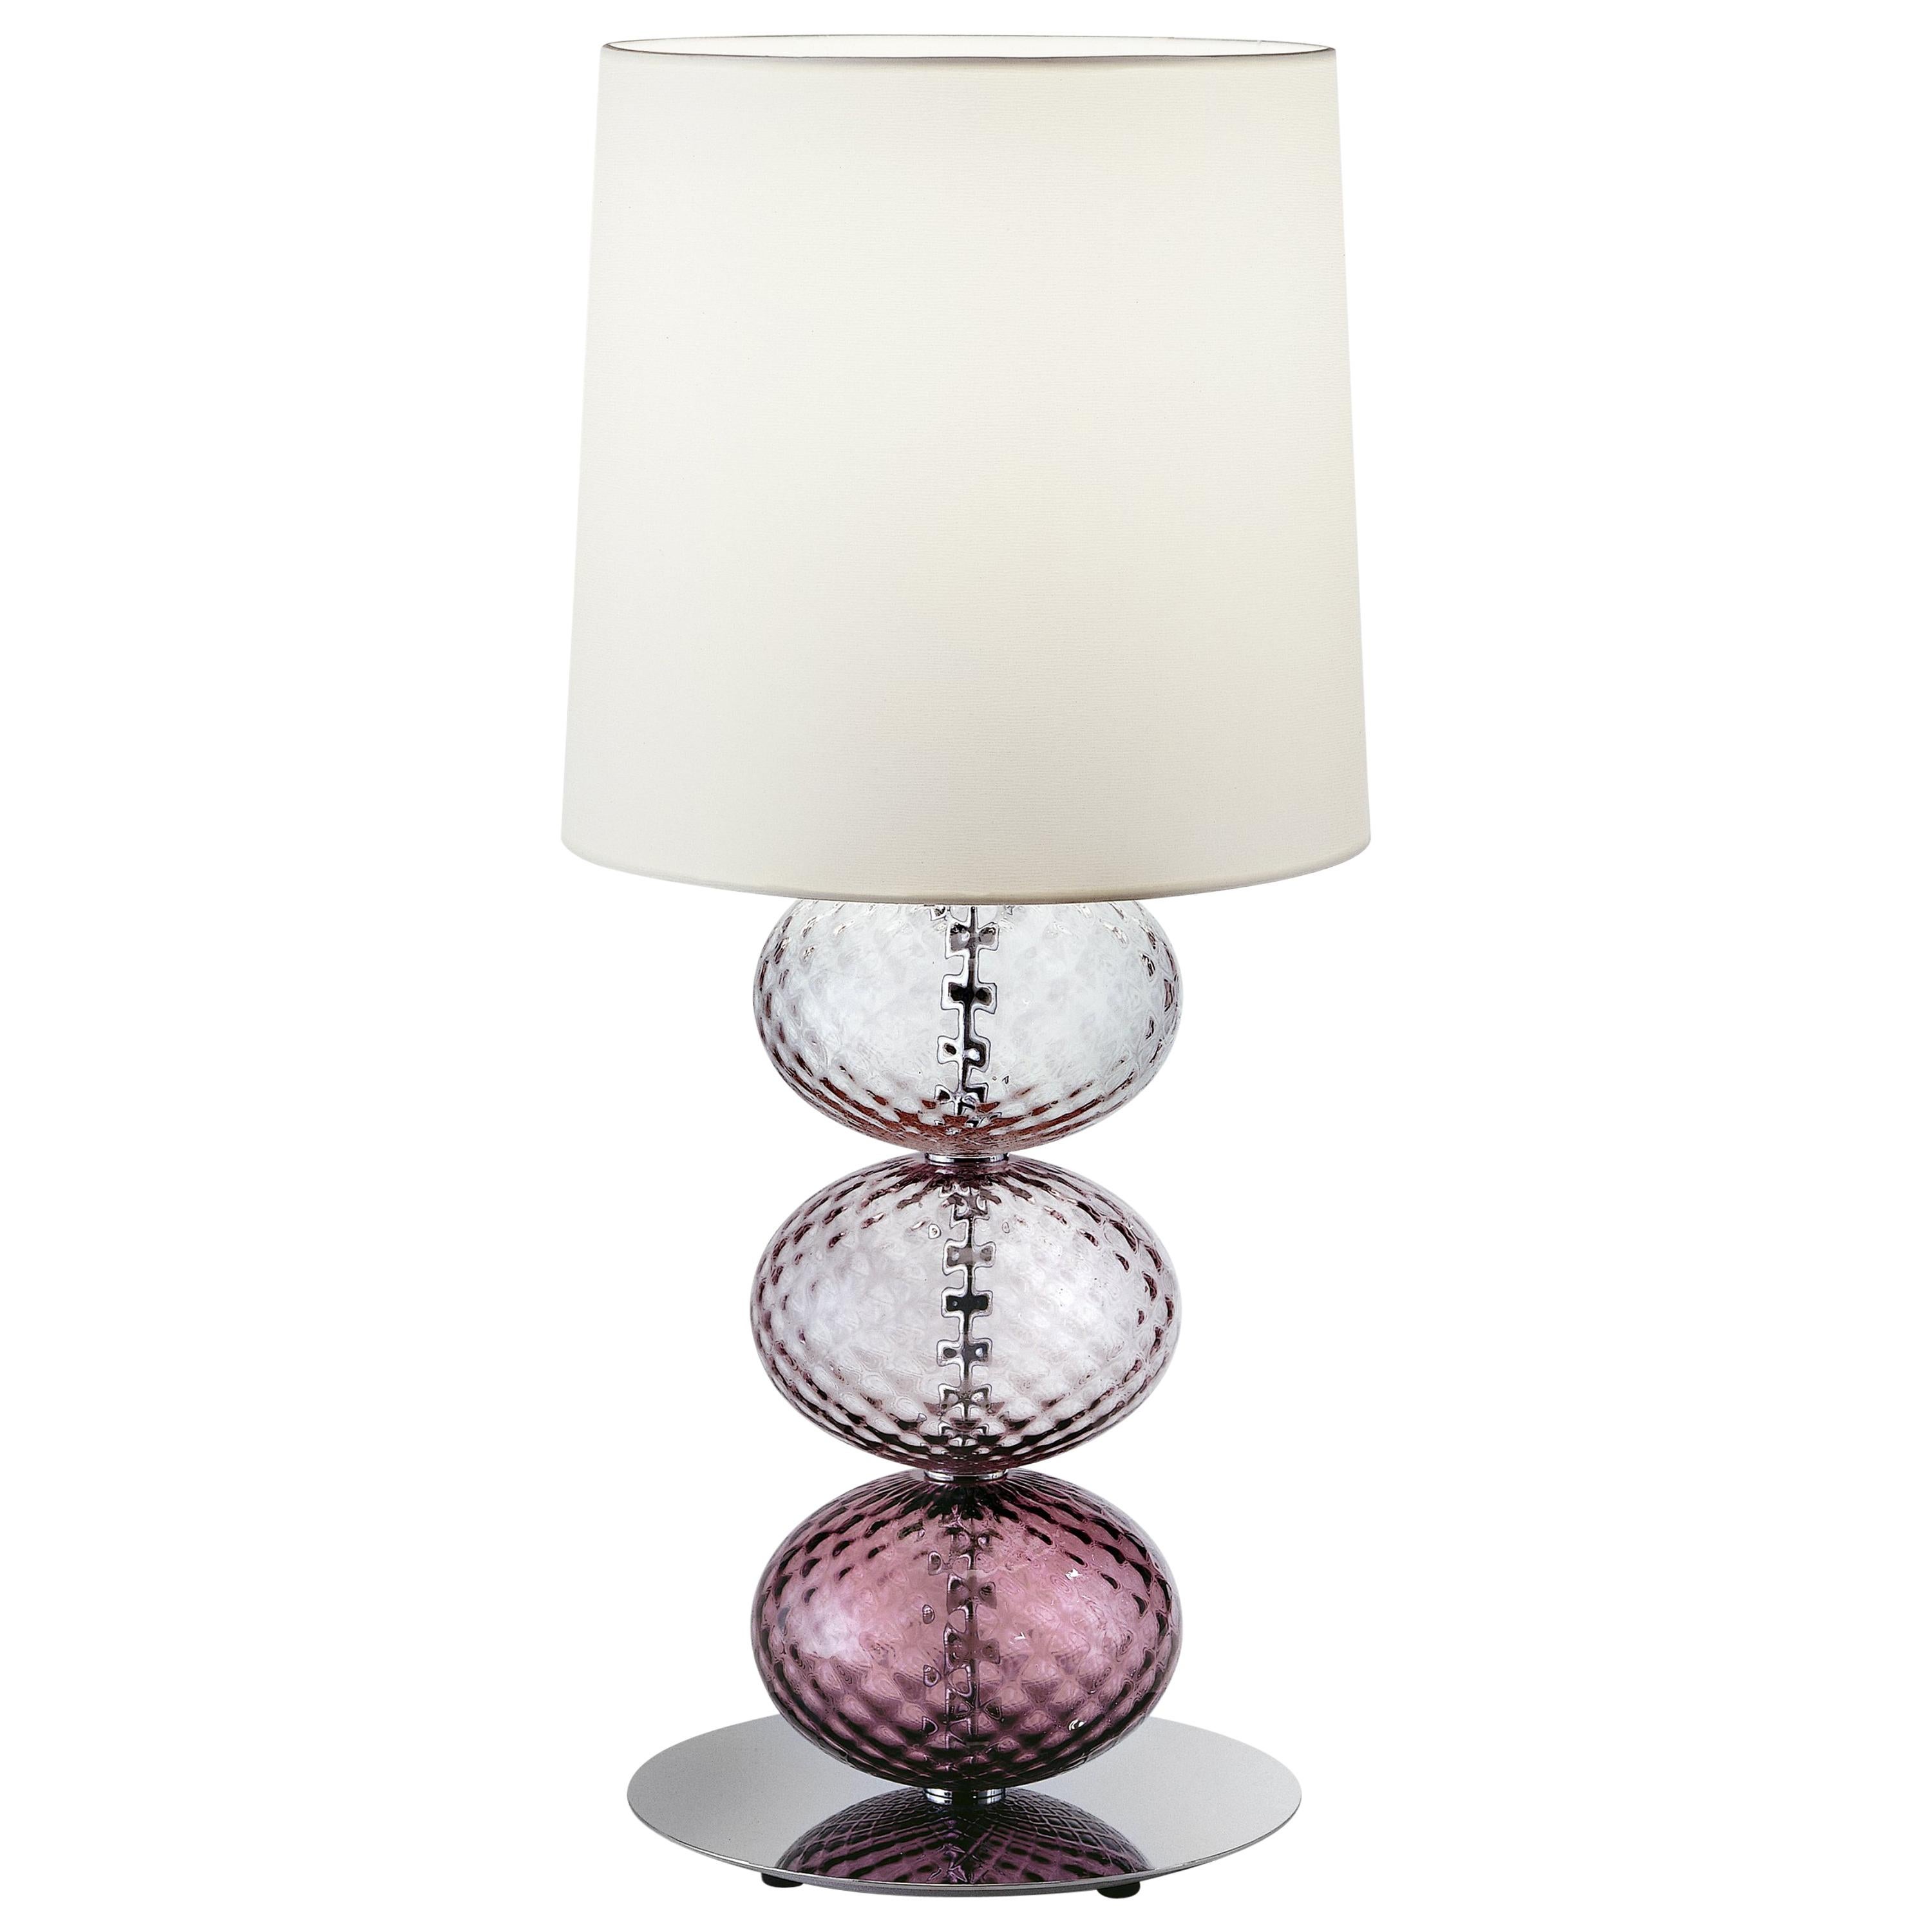 Venini Abat Jour Table Lamp in Violet, Amethyst, and Wisteria with White Shade For Sale